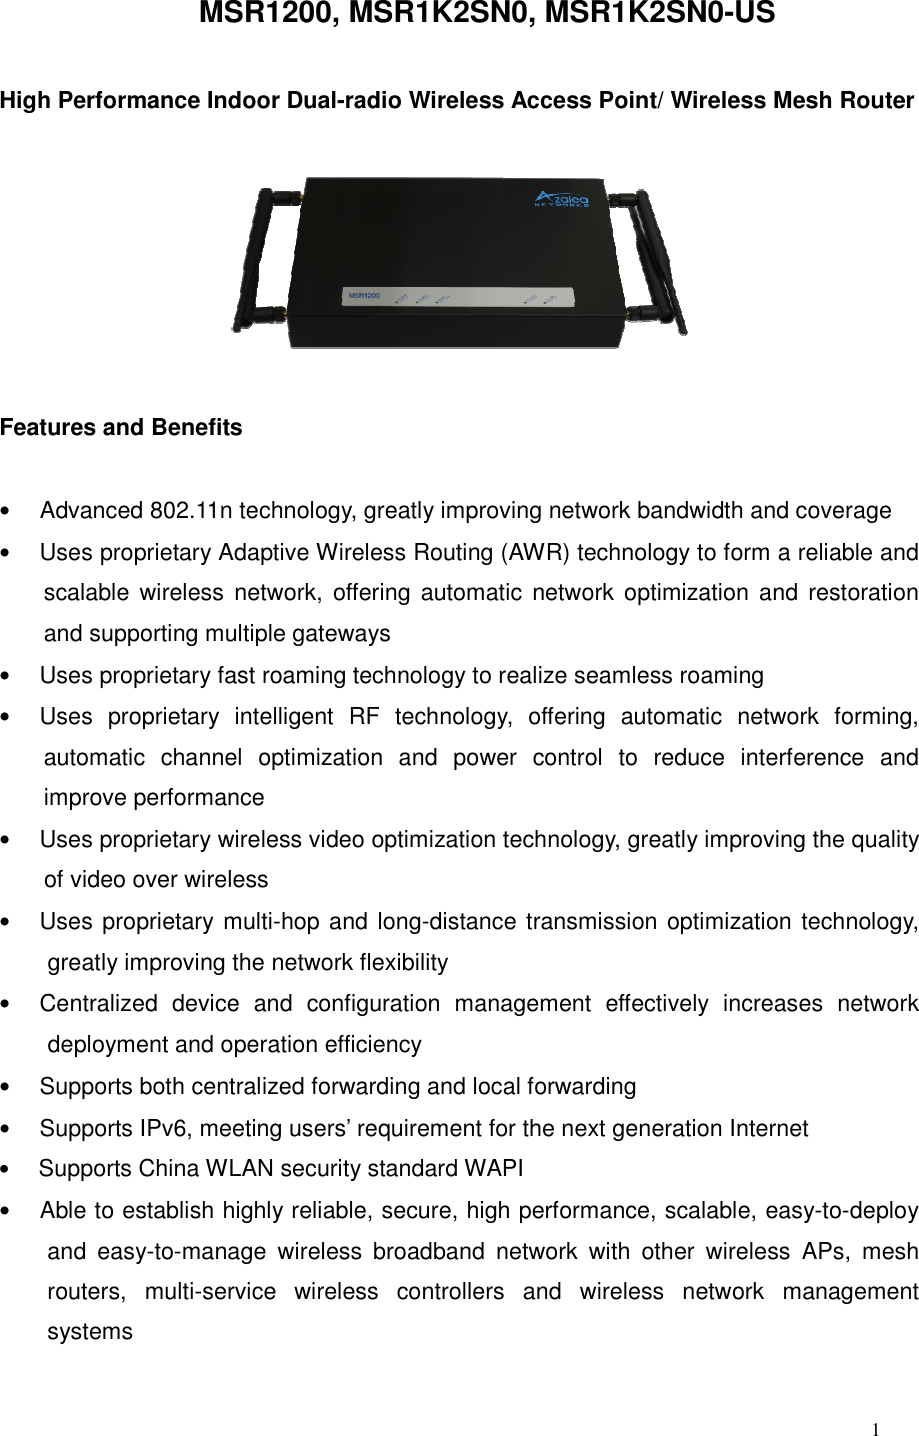  1 MSR1200, MSR1K2SN0, MSR1K2SN0-USHigh Performance Indoor Dual-radio Wireless Access Point/ Wireless Mesh Router    Features and Benefits  •     Advanced 802.11n technology, greatly improving network bandwidth and coverage   •     Uses proprietary Adaptive Wireless Routing (AWR) technology to form a reliable and scalable wireless  network,  offering automatic  network optimization  and restoration and supporting multiple gateways     •     Uses proprietary fast roaming technology to realize seamless roaming •     Uses  proprietary  intelligent  RF  technology,  offering  automatic  network  forming, automatic  channel  optimization  and  power  control  to  reduce  interference  and improve performance   •     Uses proprietary wireless video optimization technology, greatly improving the quality of video over wireless   •     Uses proprietary multi-hop and long-distance transmission optimization technology, greatly improving the network flexibility   •     Centralized  device  and  configuration  management  effectively  increases  network deployment and operation efficiency   •     Supports both centralized forwarding and local forwarding •     Supports IPv6, meeting users’ requirement for the next generation Internet   •     Supports China WLAN security standard WAPI   •     Able to establish highly reliable, secure, high performance, scalable, easy-to-deploy and  easy-to-manage  wireless  broadband  network  with  other  wireless  APs,  mesh routers,  multi-service  wireless  controllers  and  wireless  network  management systems  